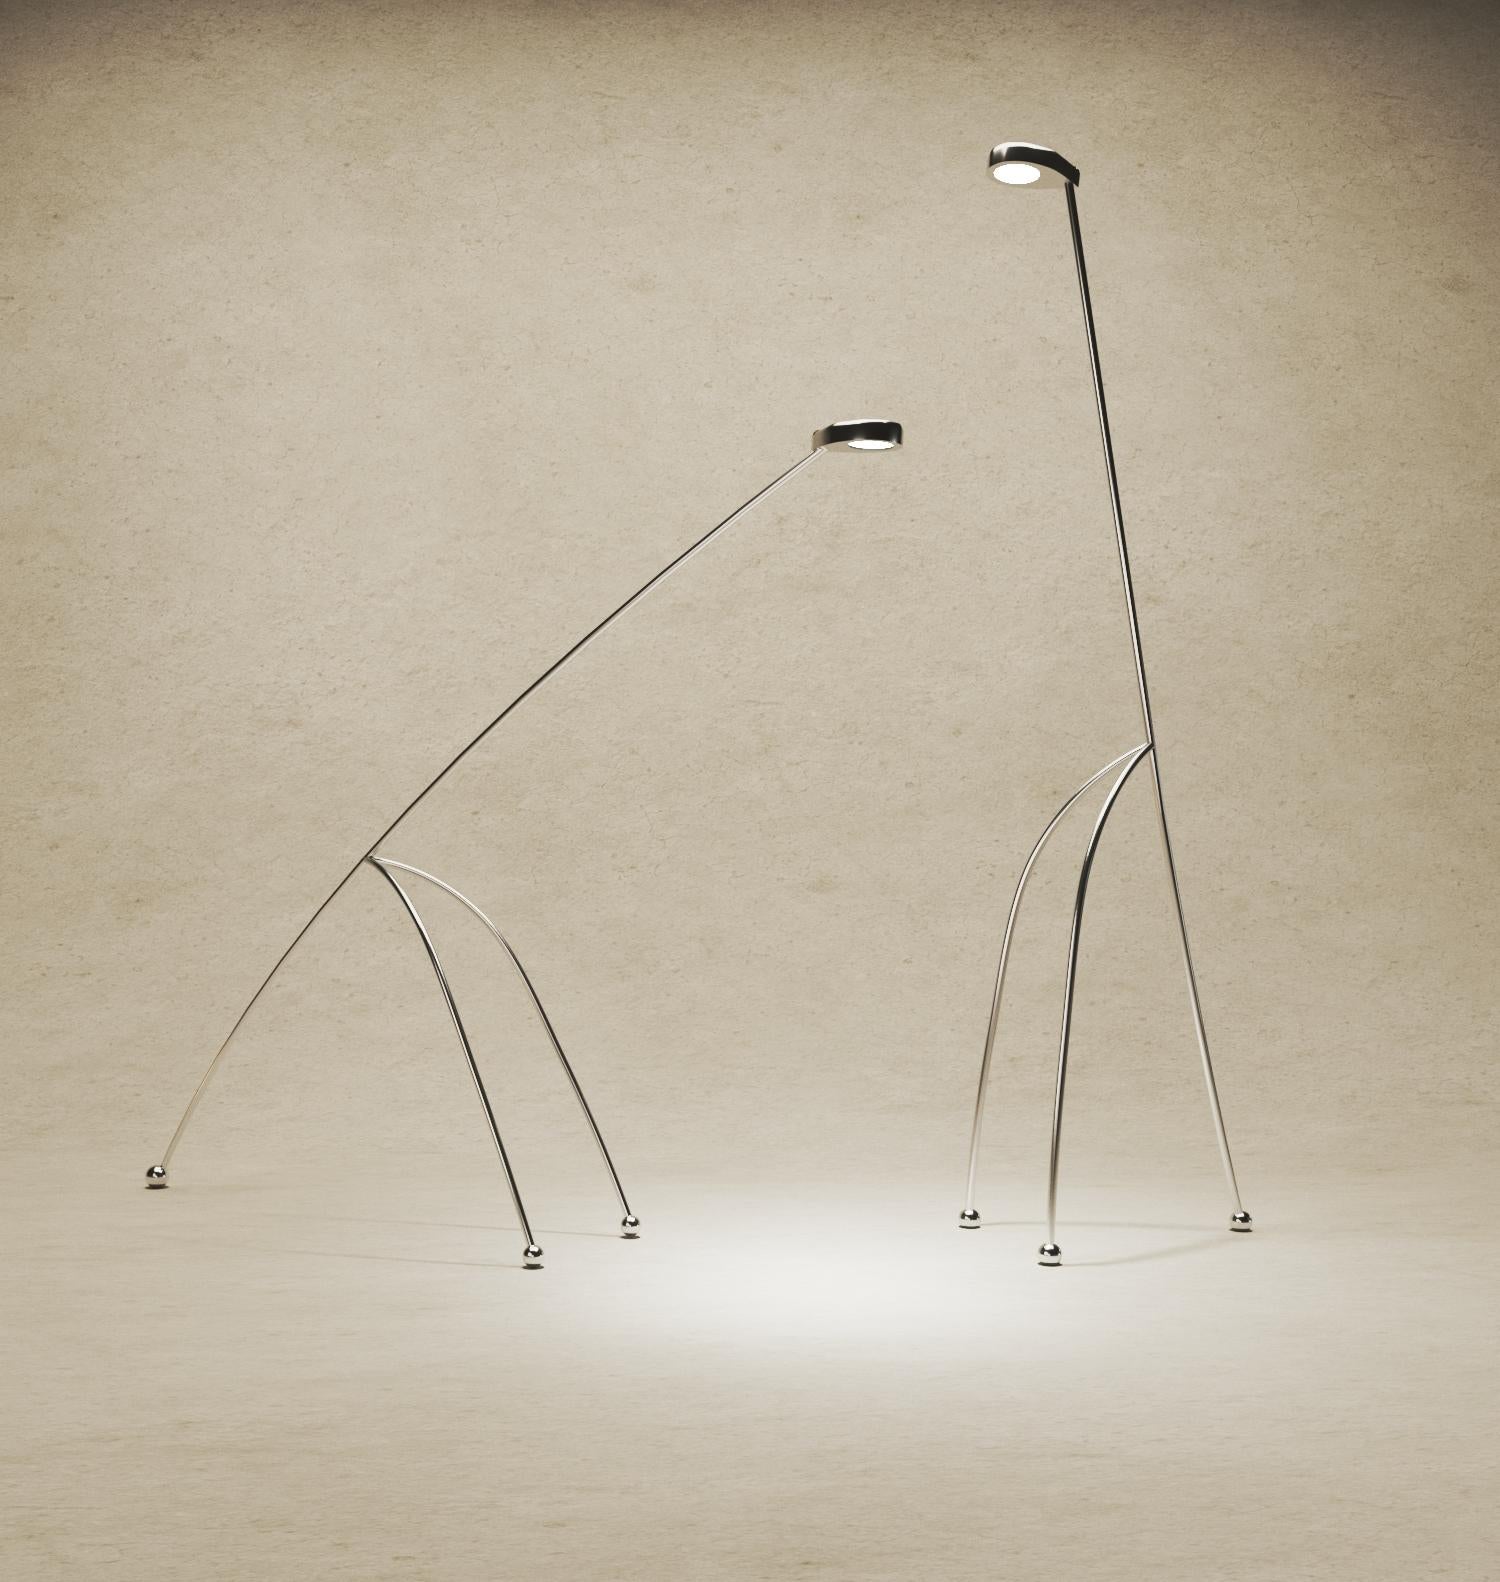 Set of 2 the Grassing Giraffe lamp by Kilzi
Dimensions: D 65 x W 210 x H 210 cm
Materials: Stainless Steel.
Dimensions may vary.

All our lamps can be wired according to each country. If sold to the USA it will be wired for the USA for